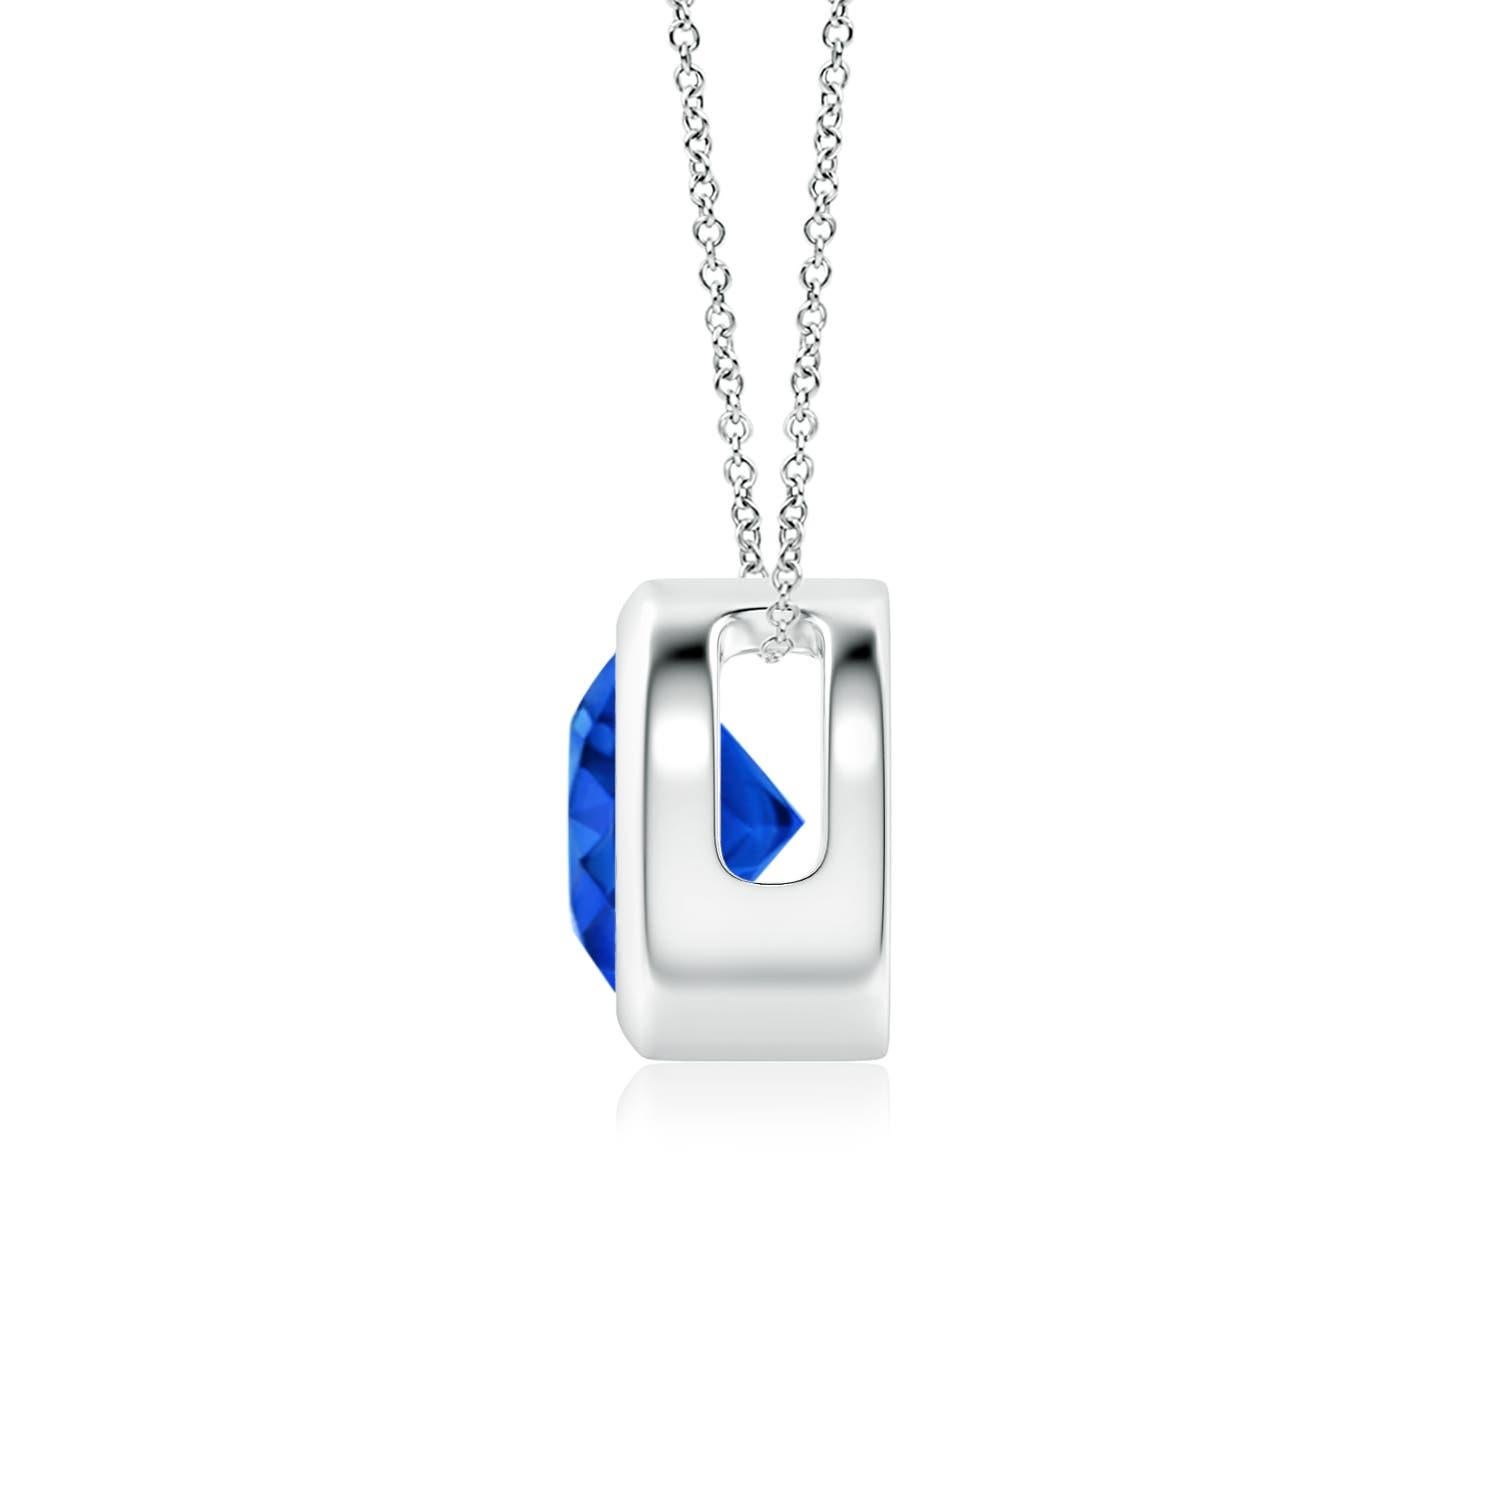 This classic solitaire sapphire pendant's beautiful design makes the center stone appear like it's floating on the chain. The radiant blue gem is secured in a bezel setting. Crafted in platinum, this round sapphire pendant is simple yet